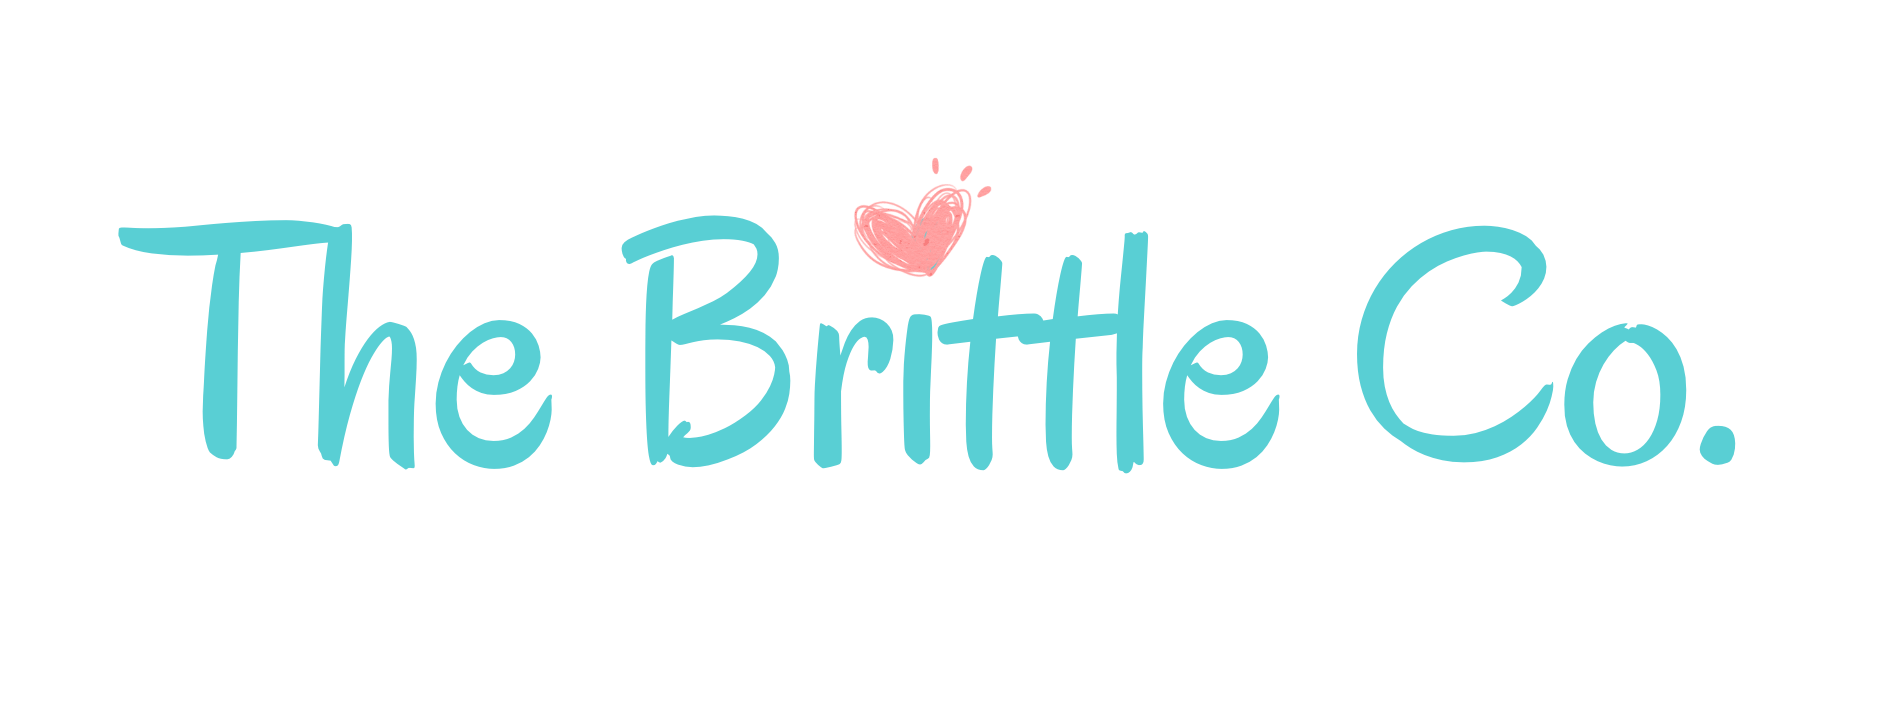 The Brittle Company